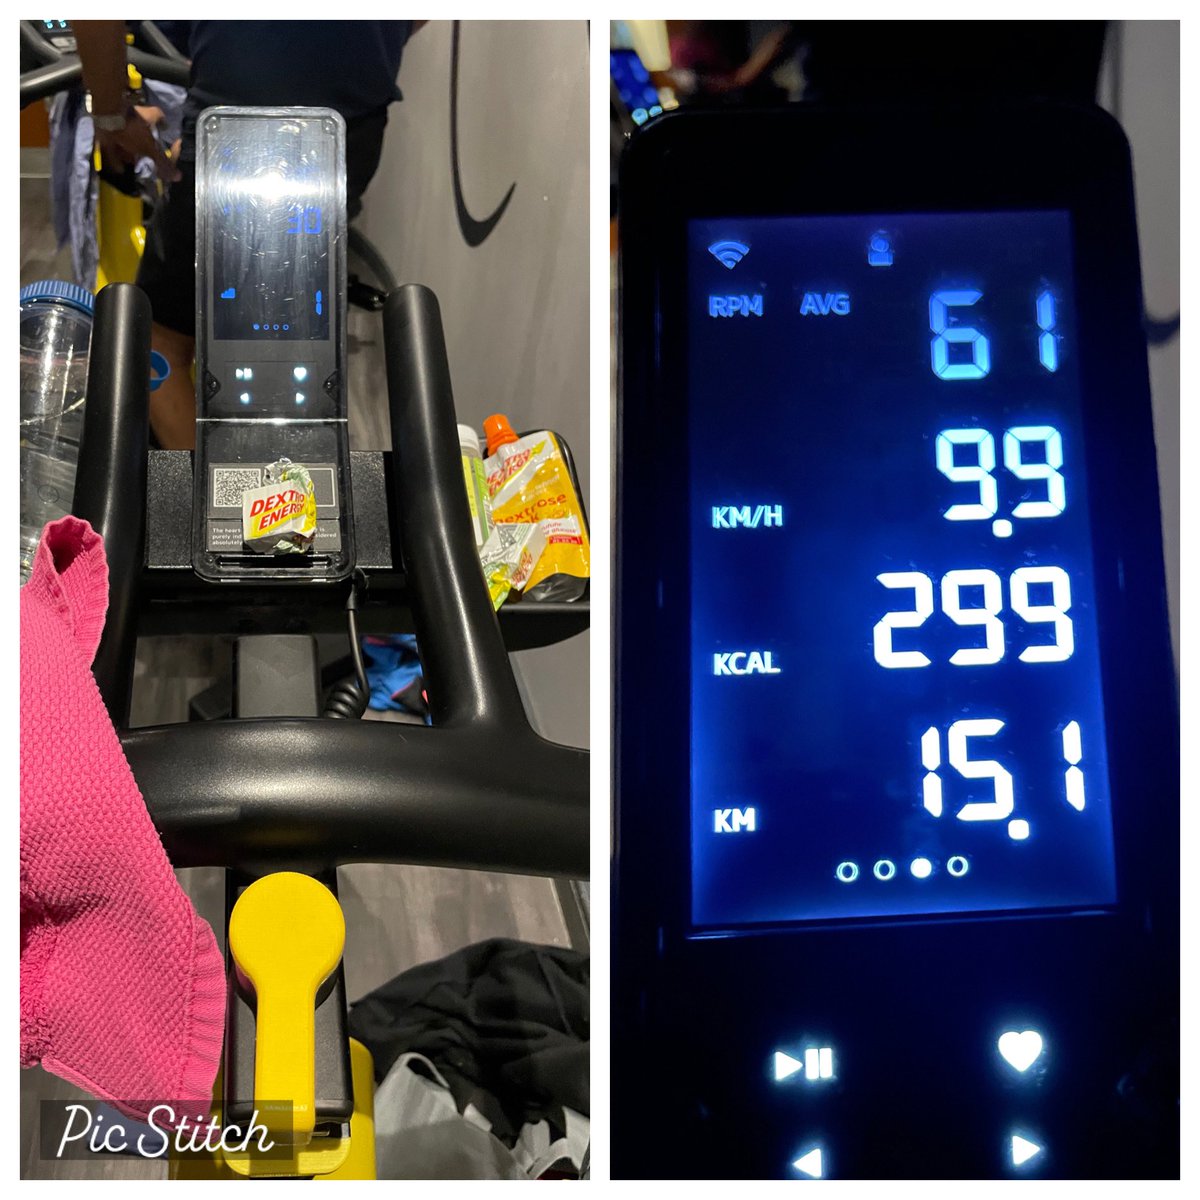 Day 5 #AHPsActive started very wet. Went to a 1hr spin class this morning. This week has been so busy and not had much of an opportunity to be active at the gym. #fillingmycup  @WeAHPs #primarycareOTs #occupationaltherapist #typeonediabetic #glucoseattheready